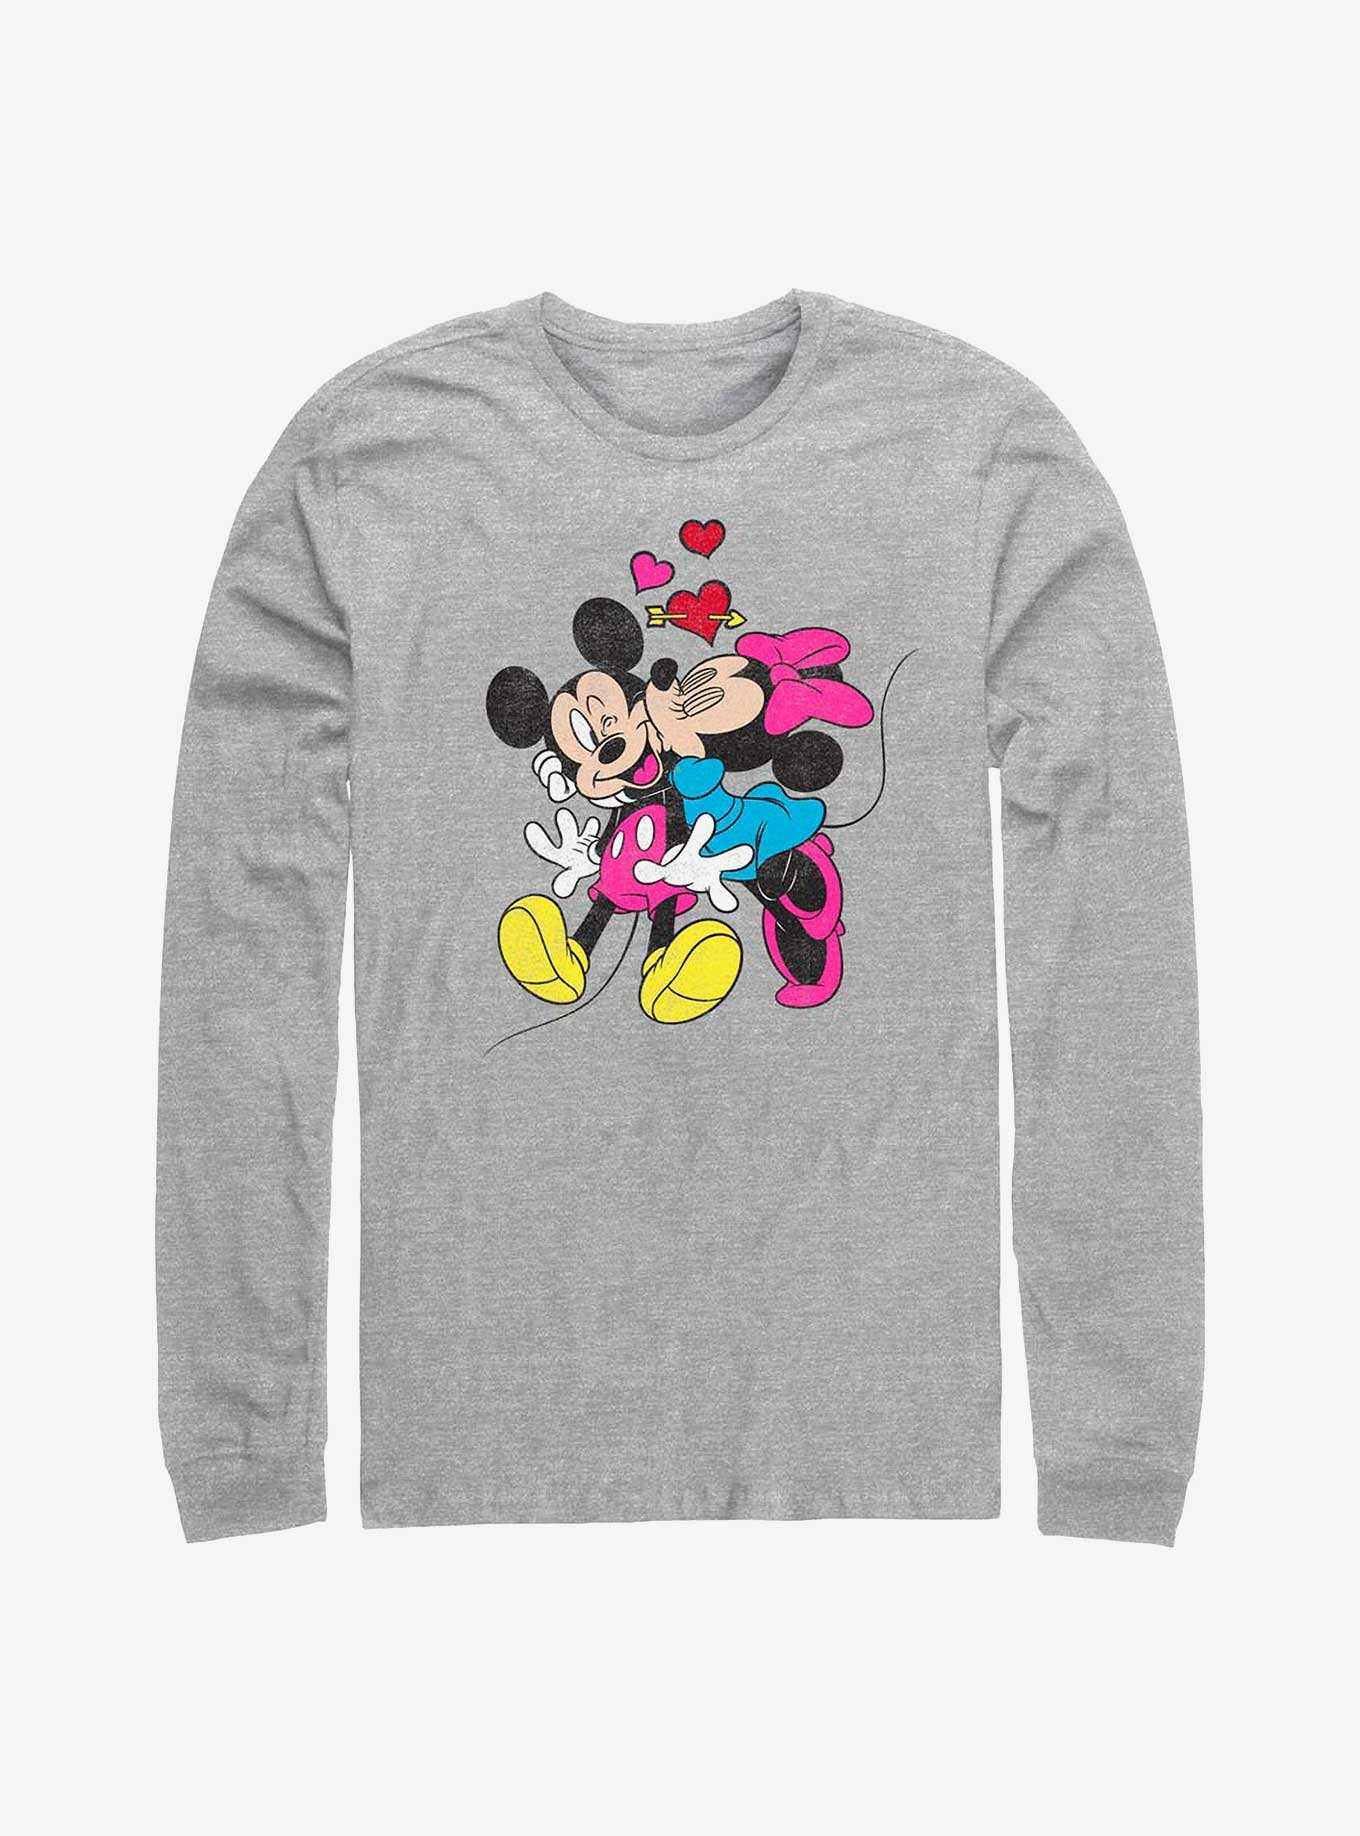 Disney Mickey Mouse & Minnie Mouse Love Long-Sleeve T-Shirt, , hi-res